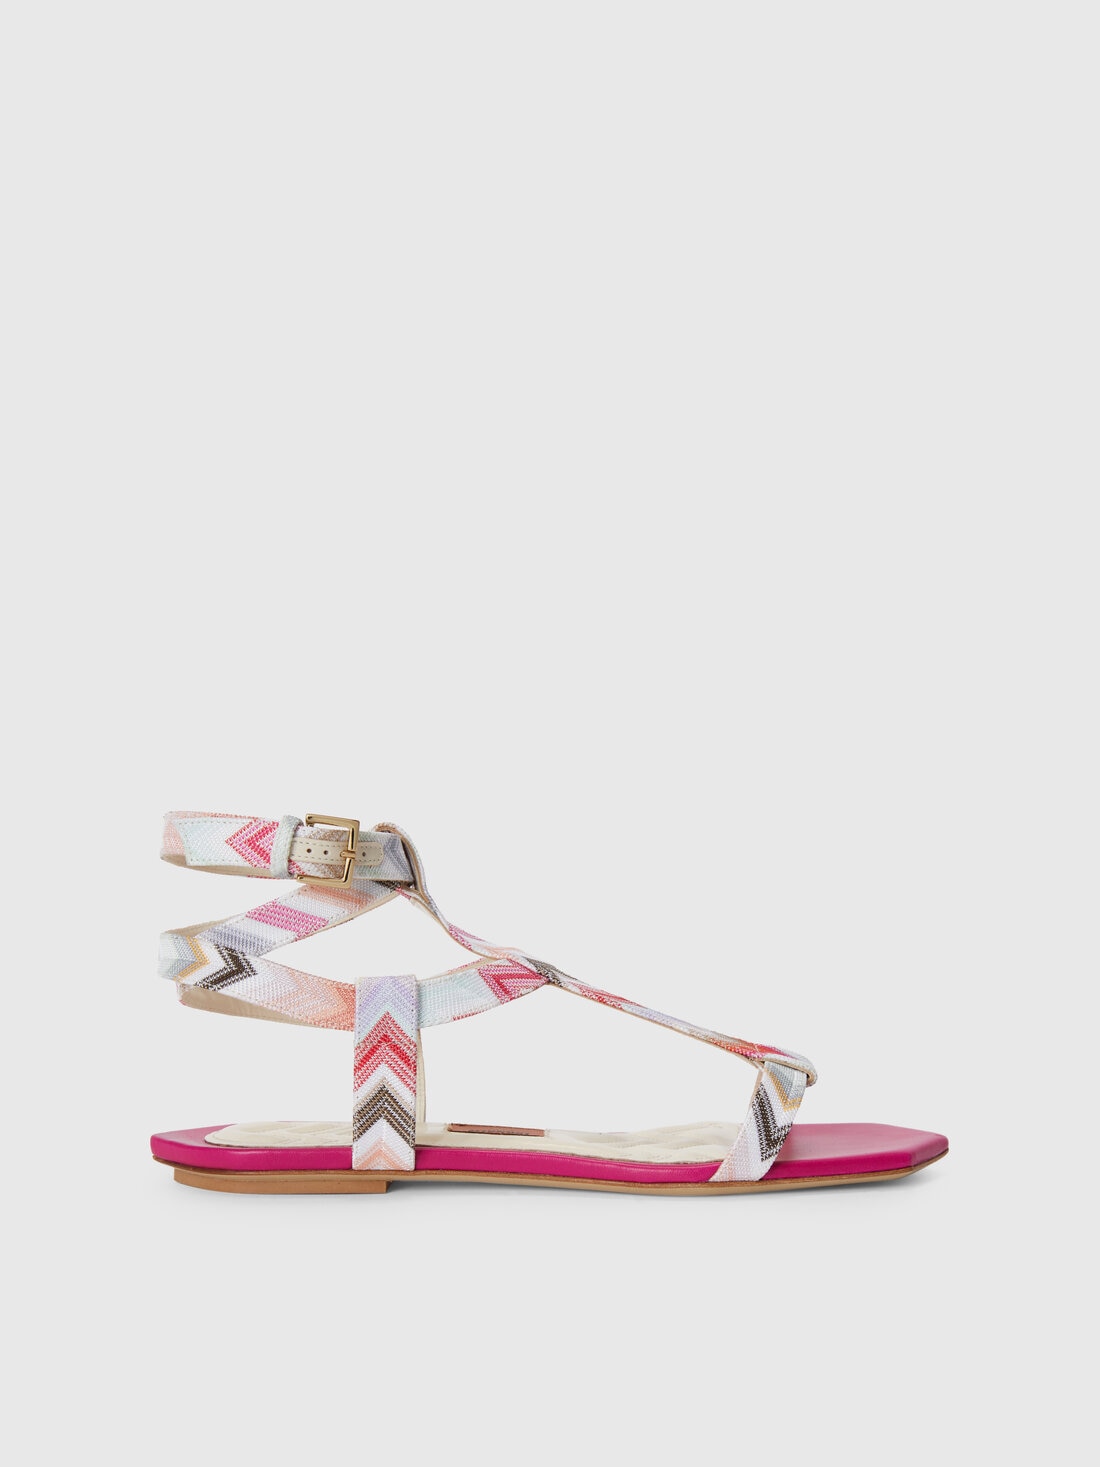 Low sandals in zigzag fabric, Pink   - LS24SY02BV00FYS30DQ - 0